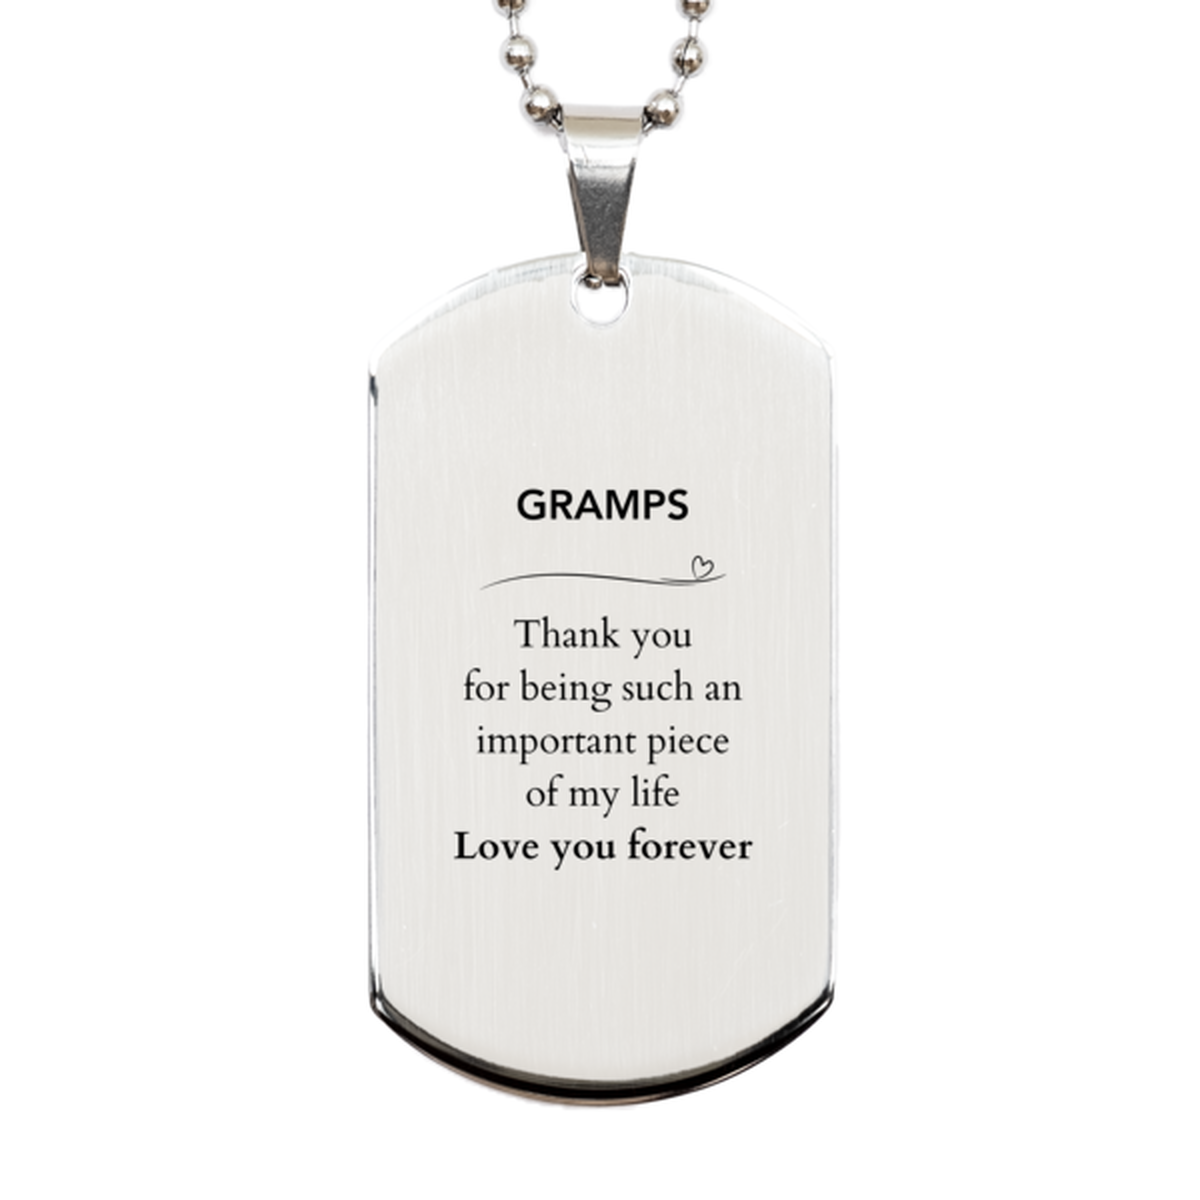 Appropriate Gramps Silver Dog Tag Epic Birthday Gifts for Gramps Thank you for being such an important piece of my life Gramps Christmas Mothers Fathers Day